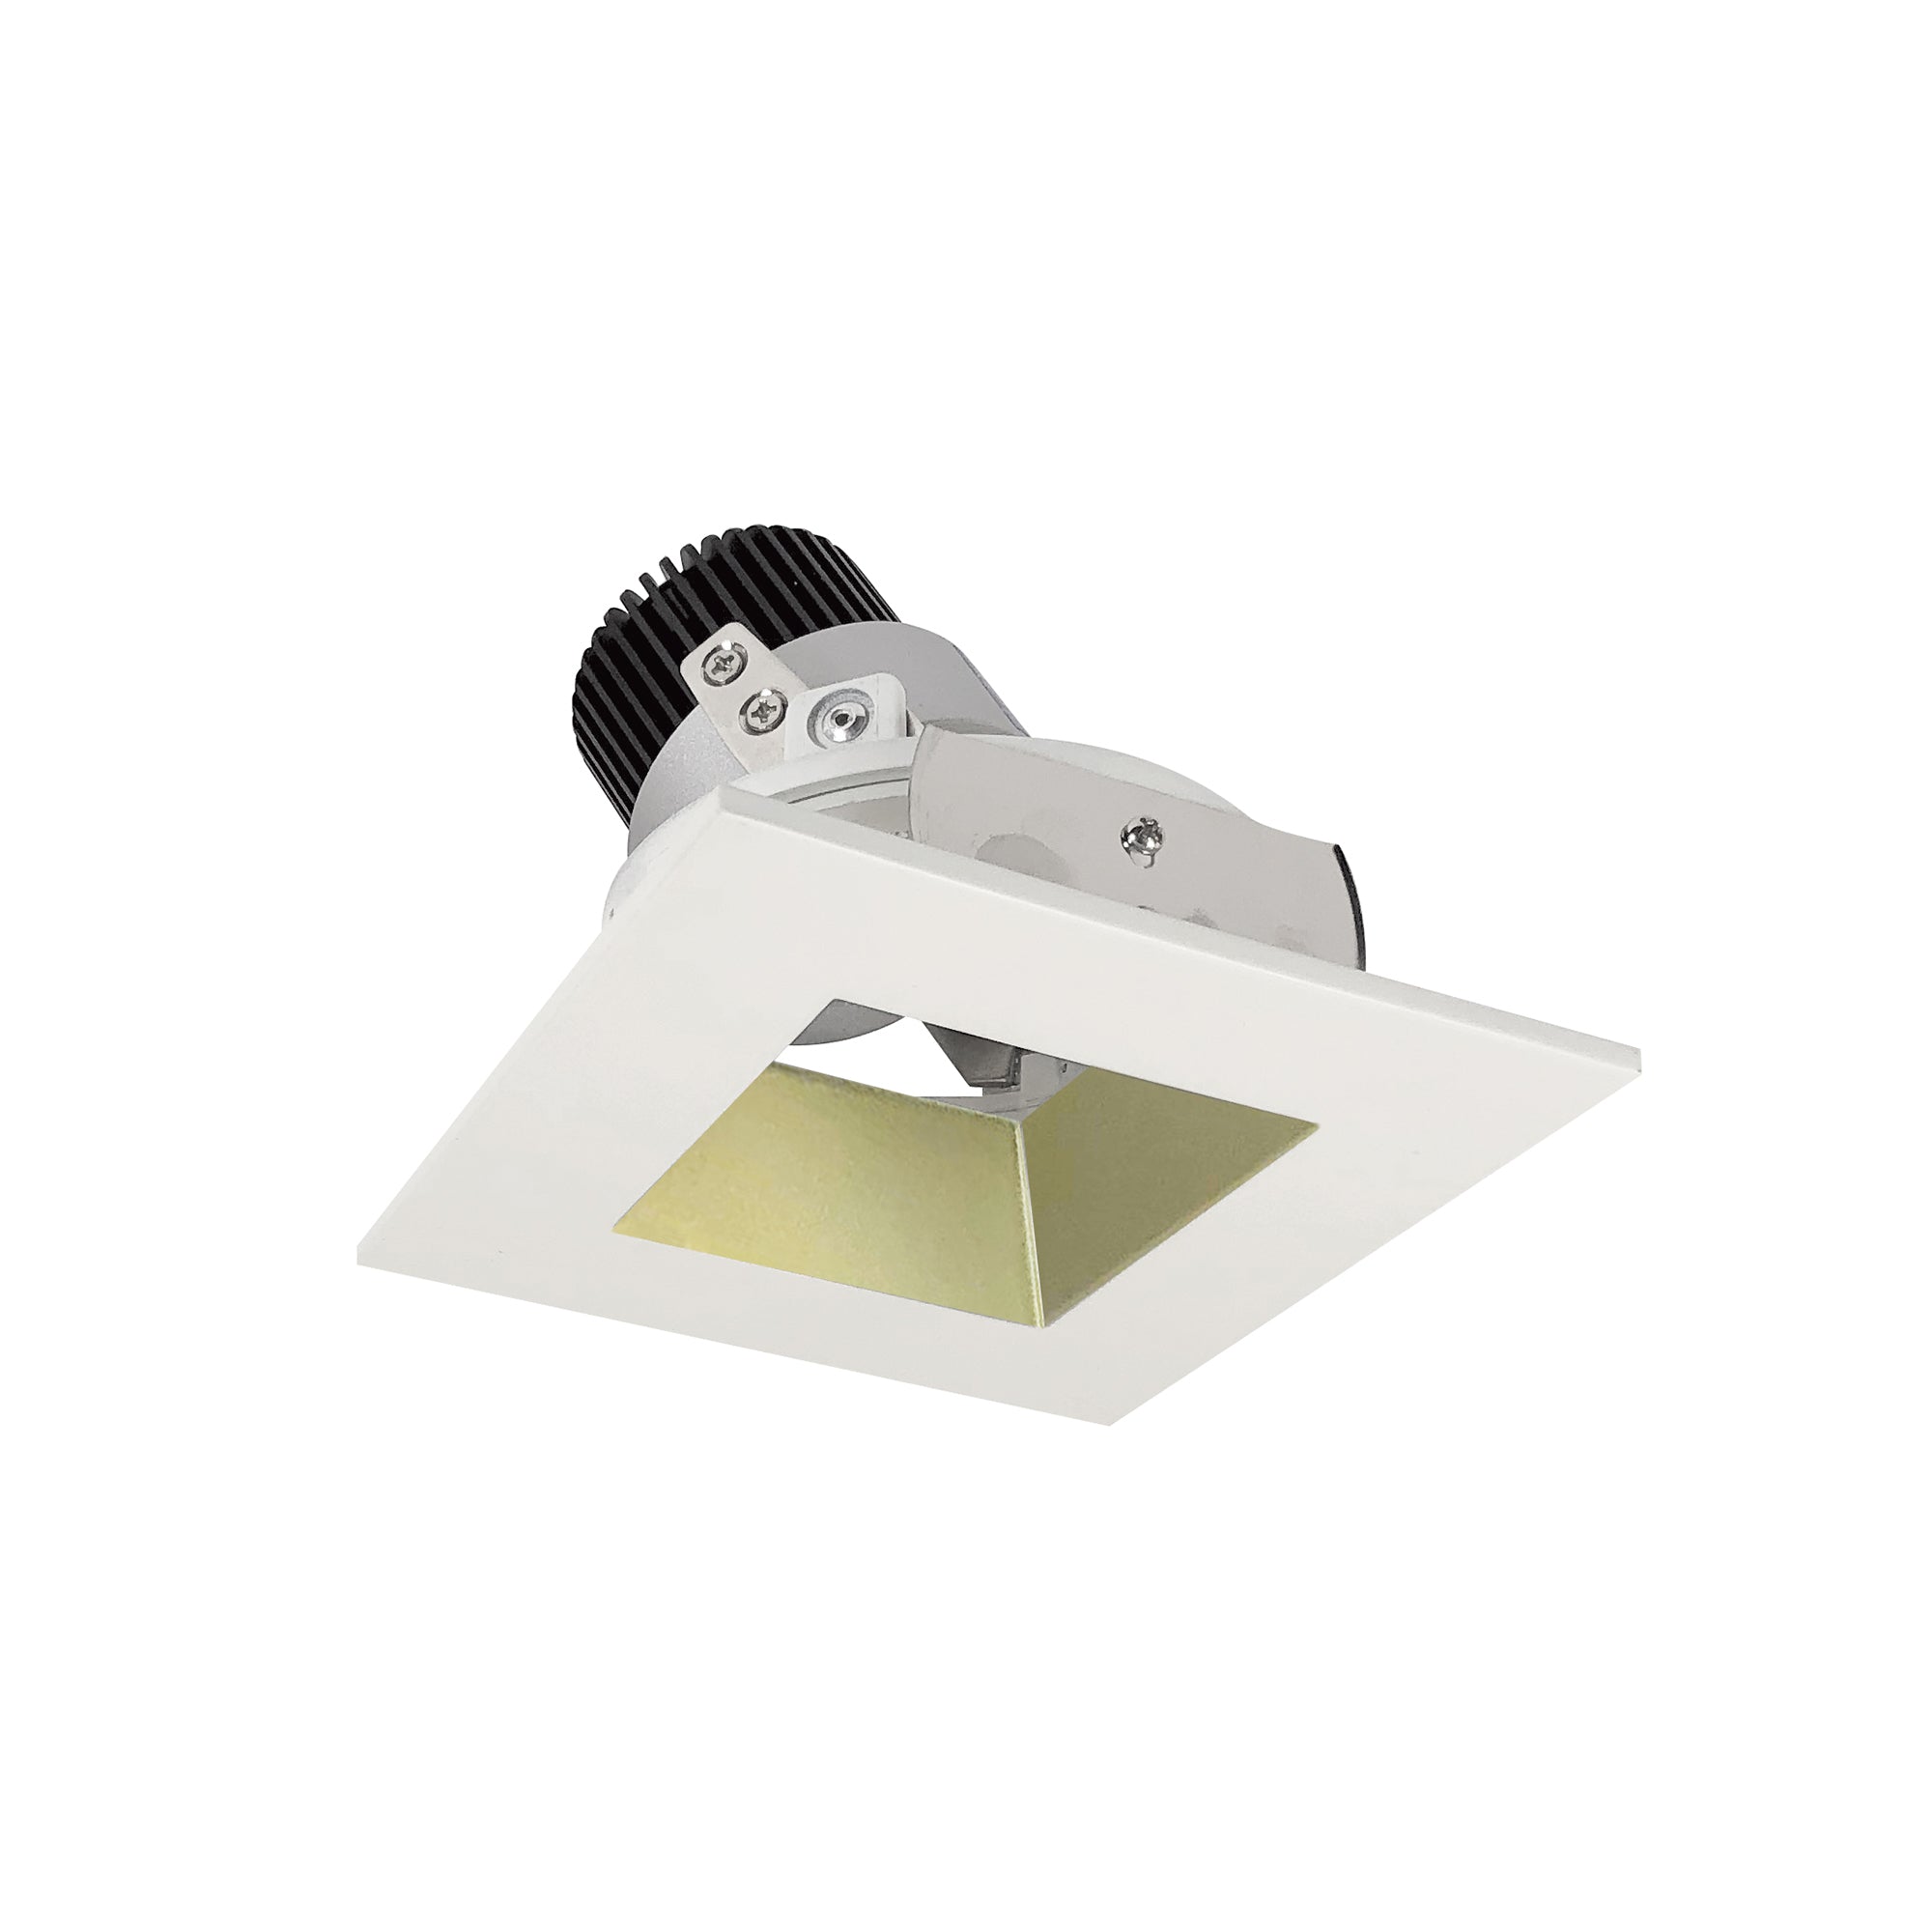 Nora Lighting NIO-4SDSQ40XCHMPW/10 4" Iolite LED Square Adjustable Reflector With Square Aperture, 1000lm / 14W, 4000K - Champagne Haze Reflector / Matte Powder White Flange